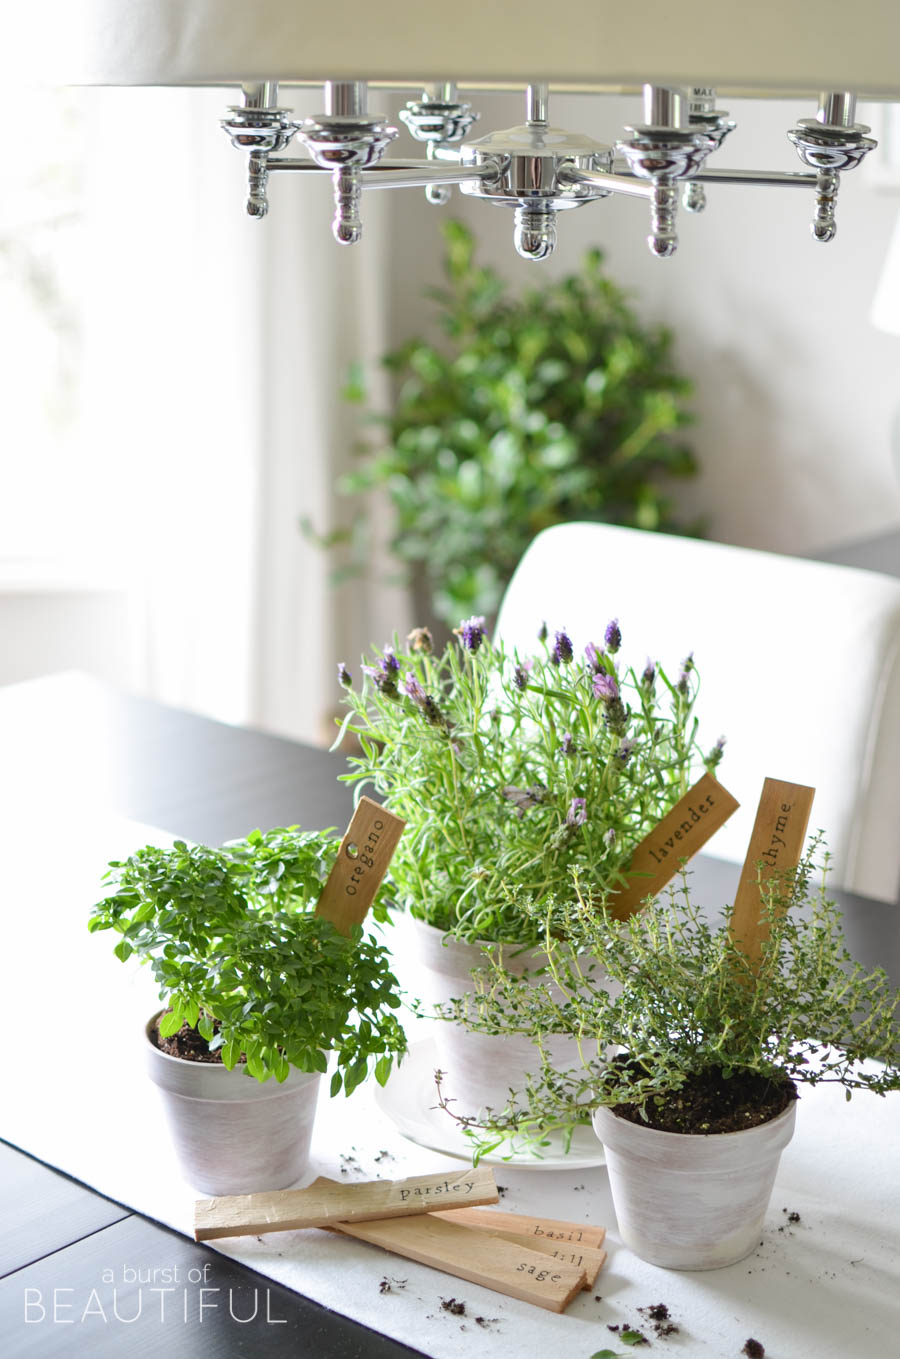 20 Creative DIY Plant Marker Ideas- There's no need to spend money on boring commercial garden markers if you have some basic DIY skills. Instead, check out these cute and clever DIY plant marker ideas! | how to label plants in your garden, ideas for making plant markers, label your herbs, garden markers, #gardening #DIY #garden #craft #ACultivatedNest